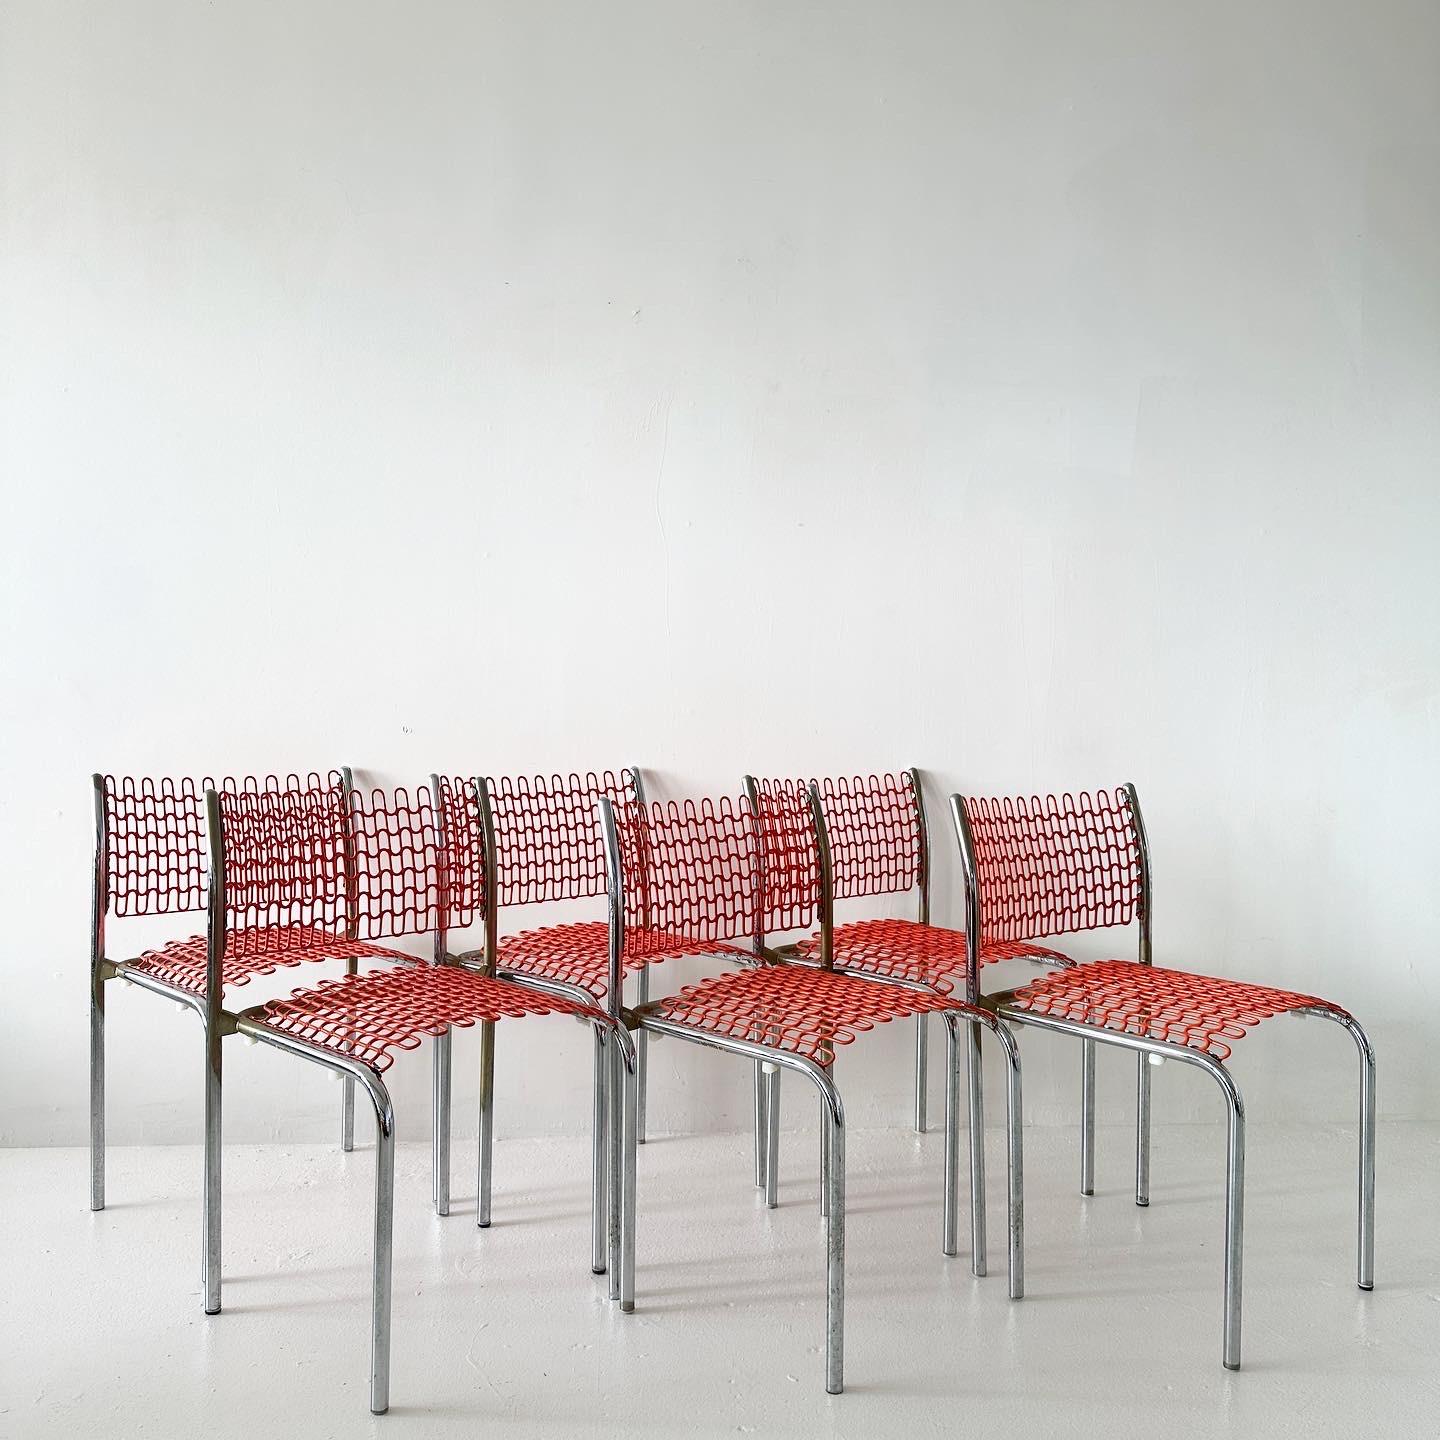 Post-Modern Orange Sof Tech Chairs by David Rowland for Thonet (set of 4) For Sale